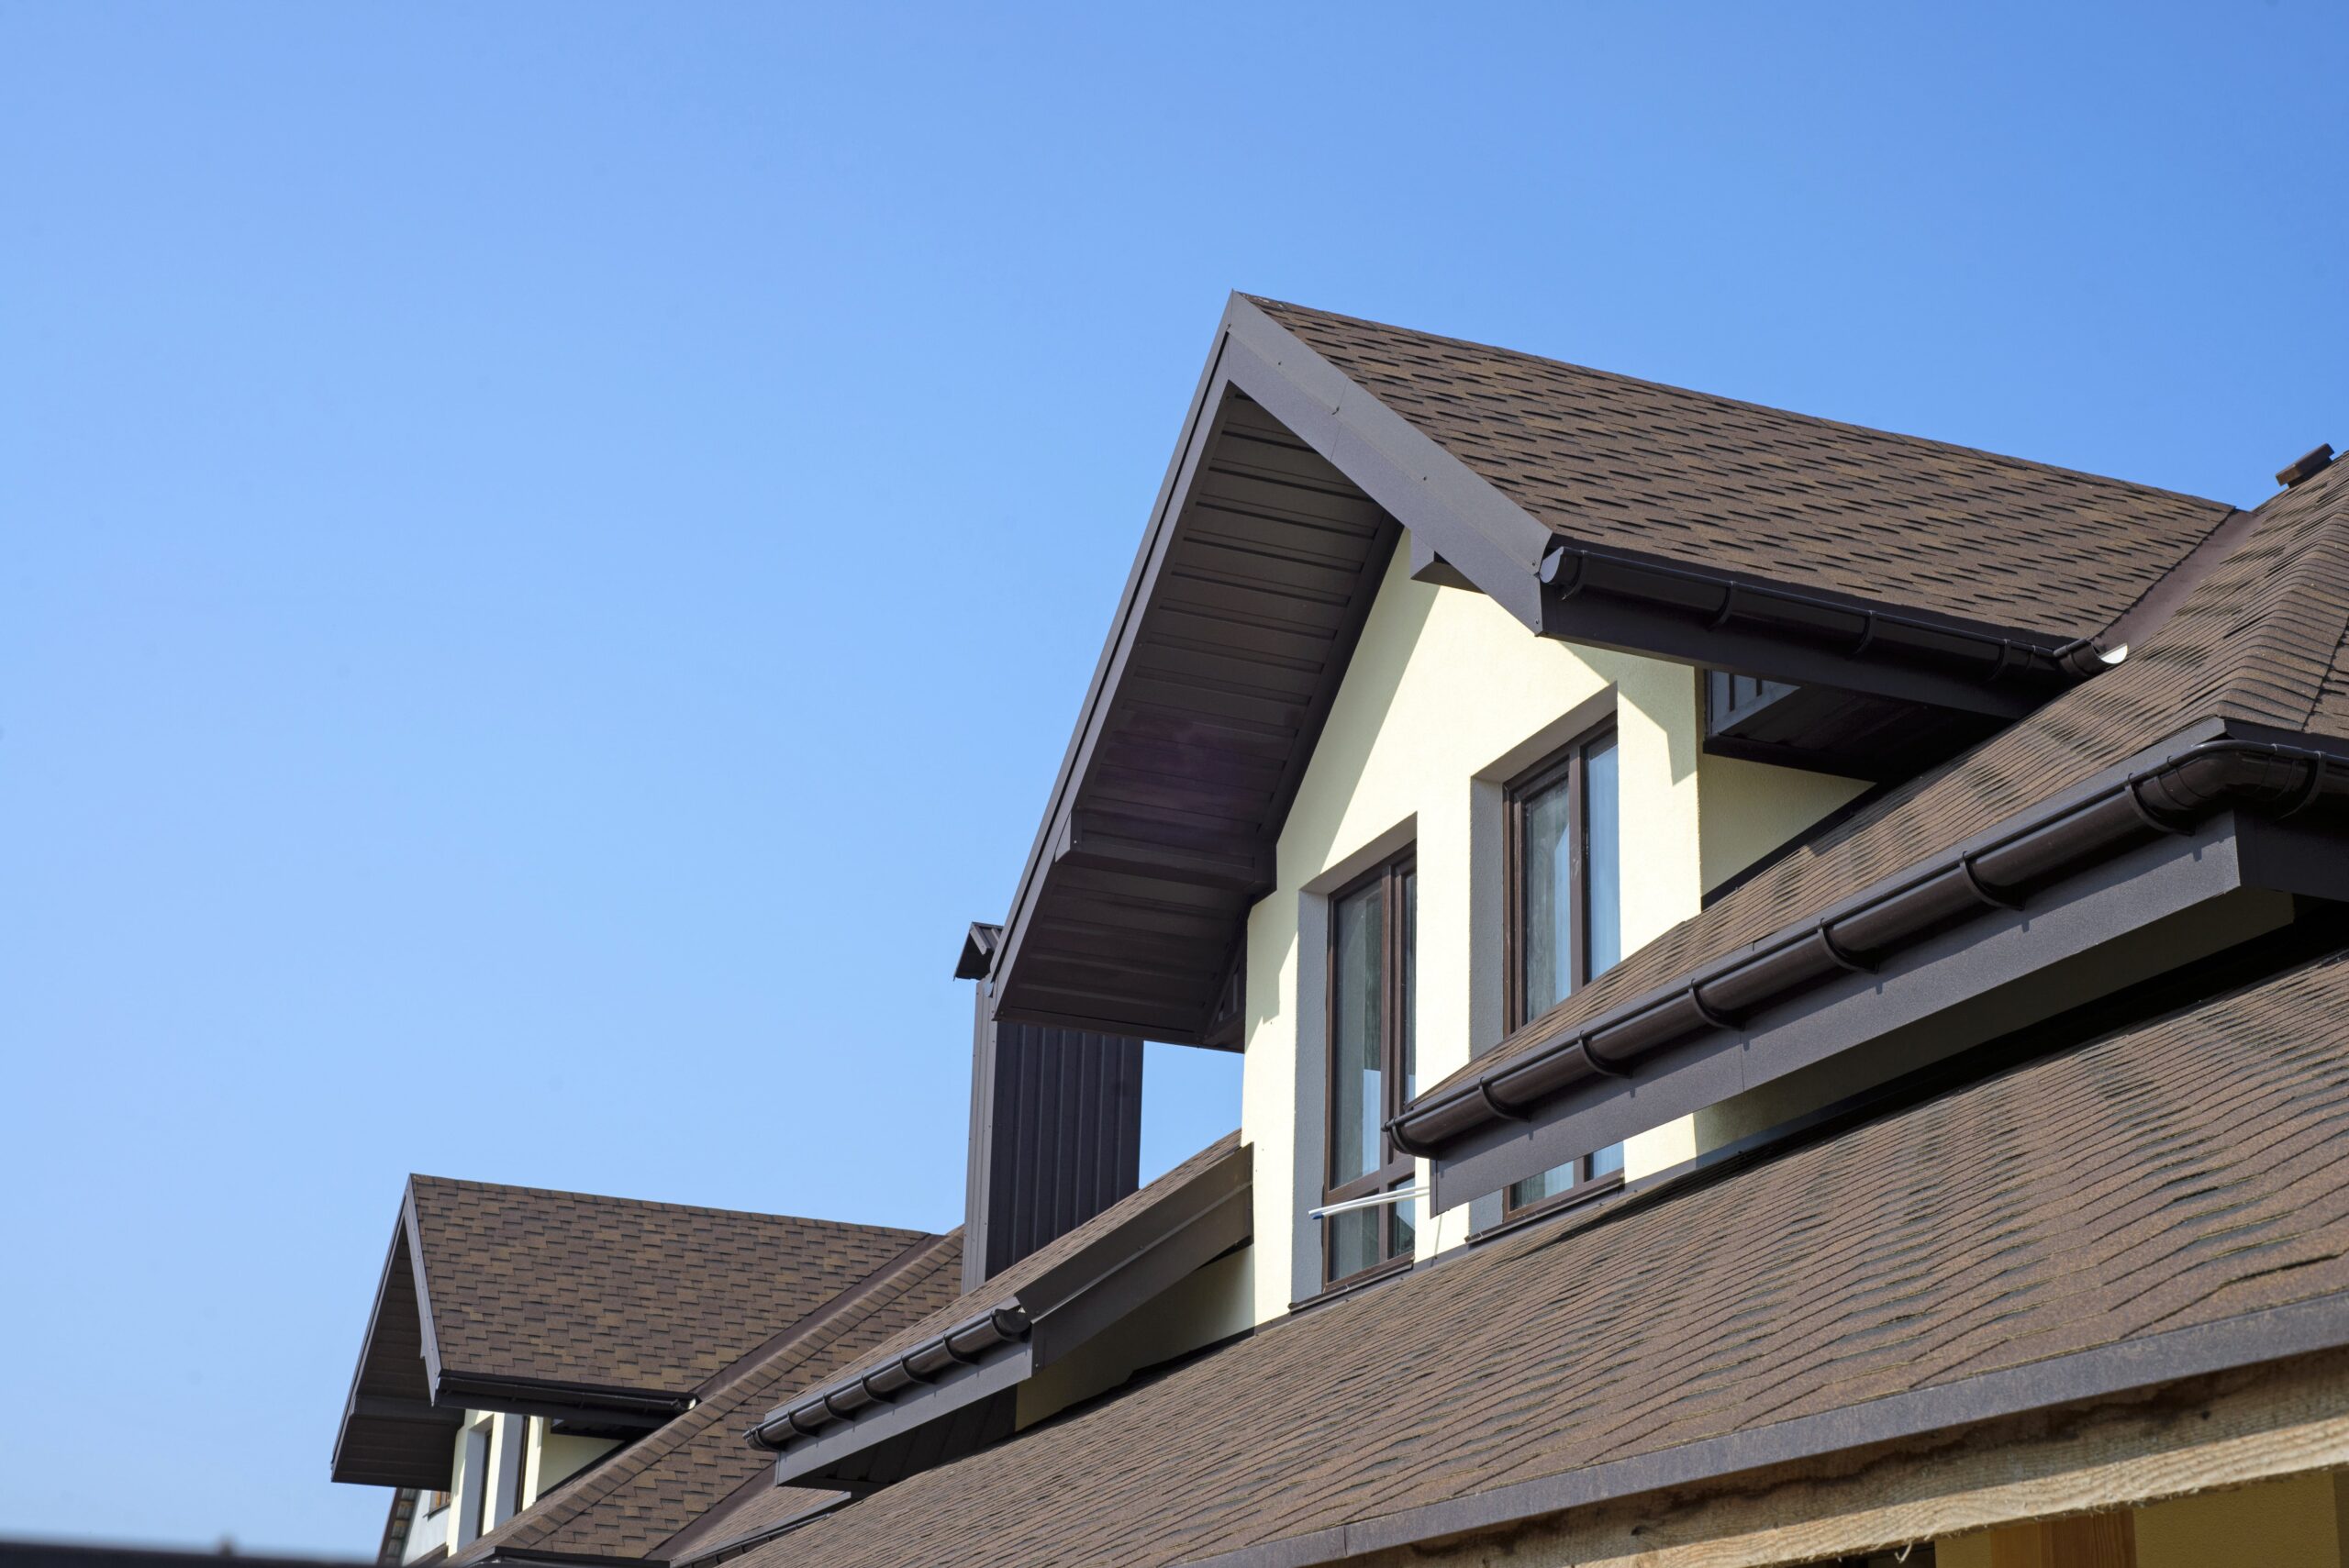 Shingle roofing on a house for small roof repair contractors to work